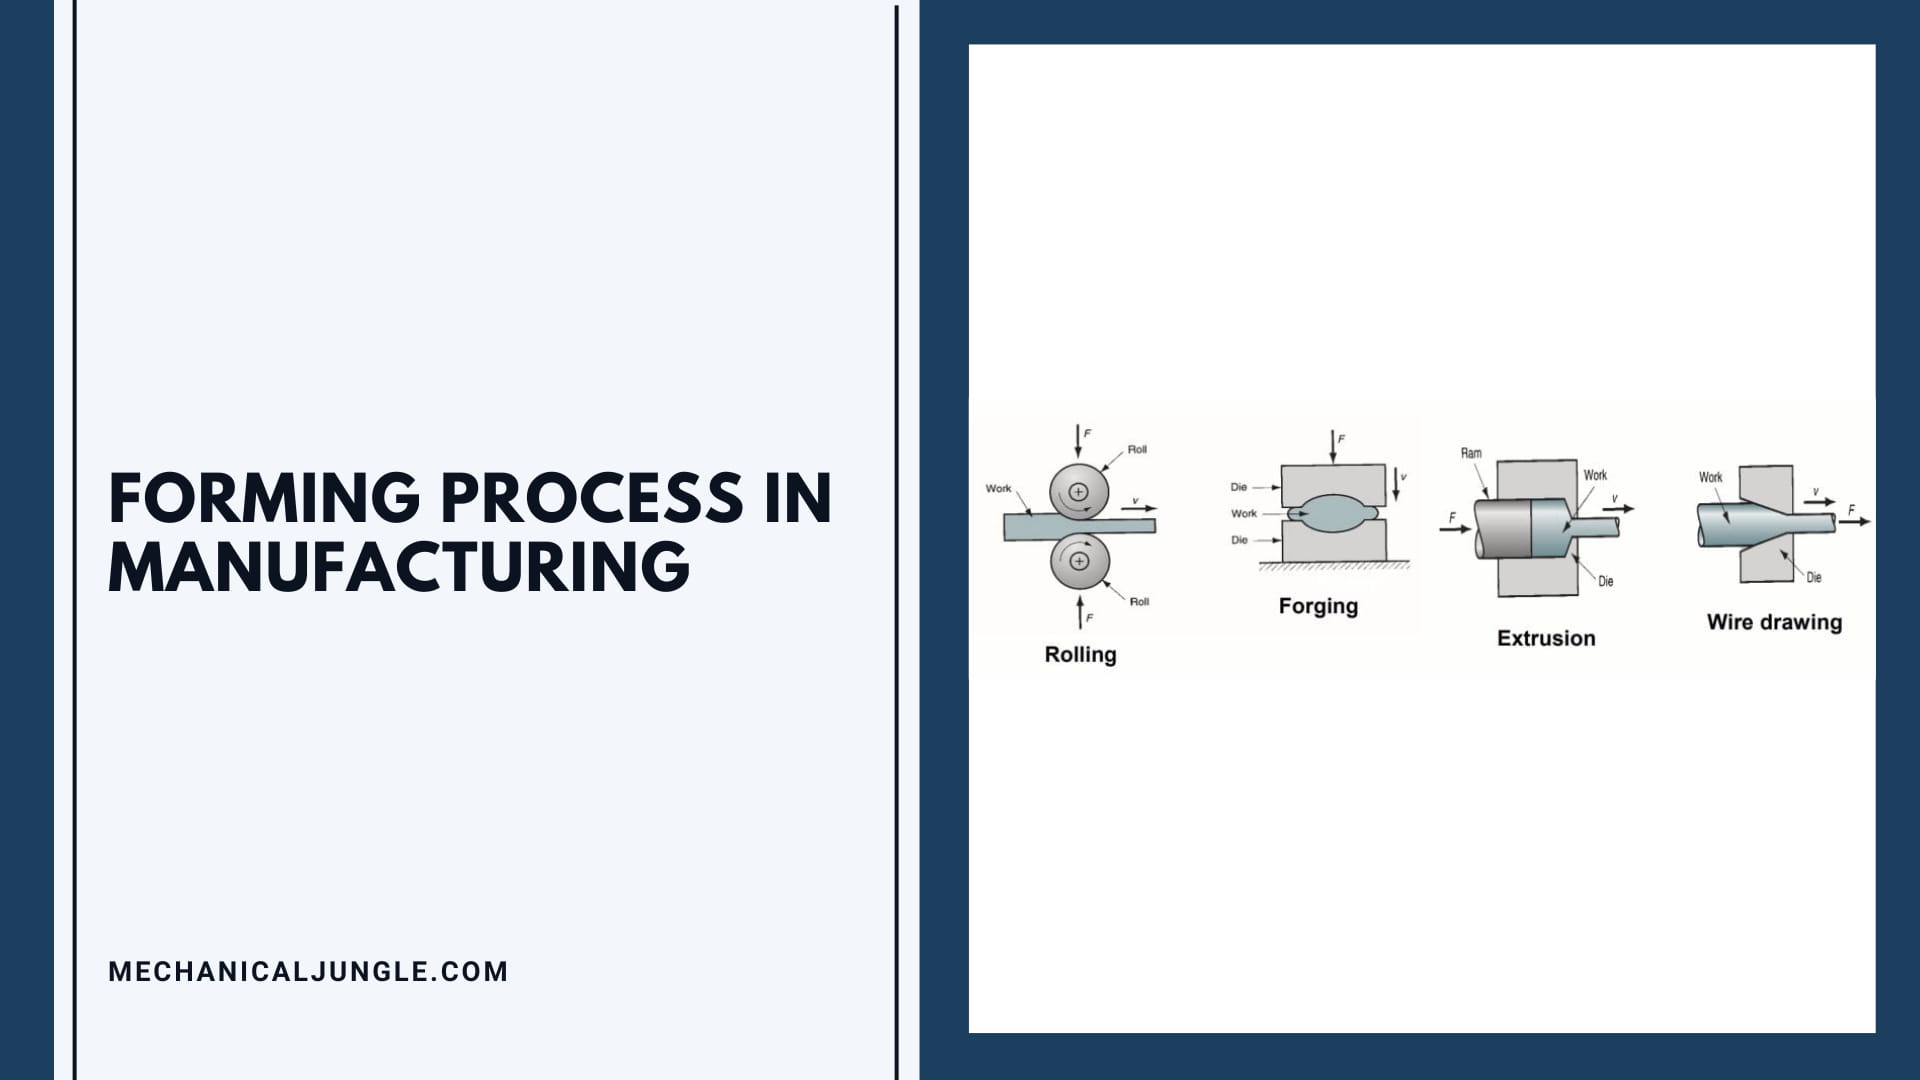 Forming Process in Manufacturing